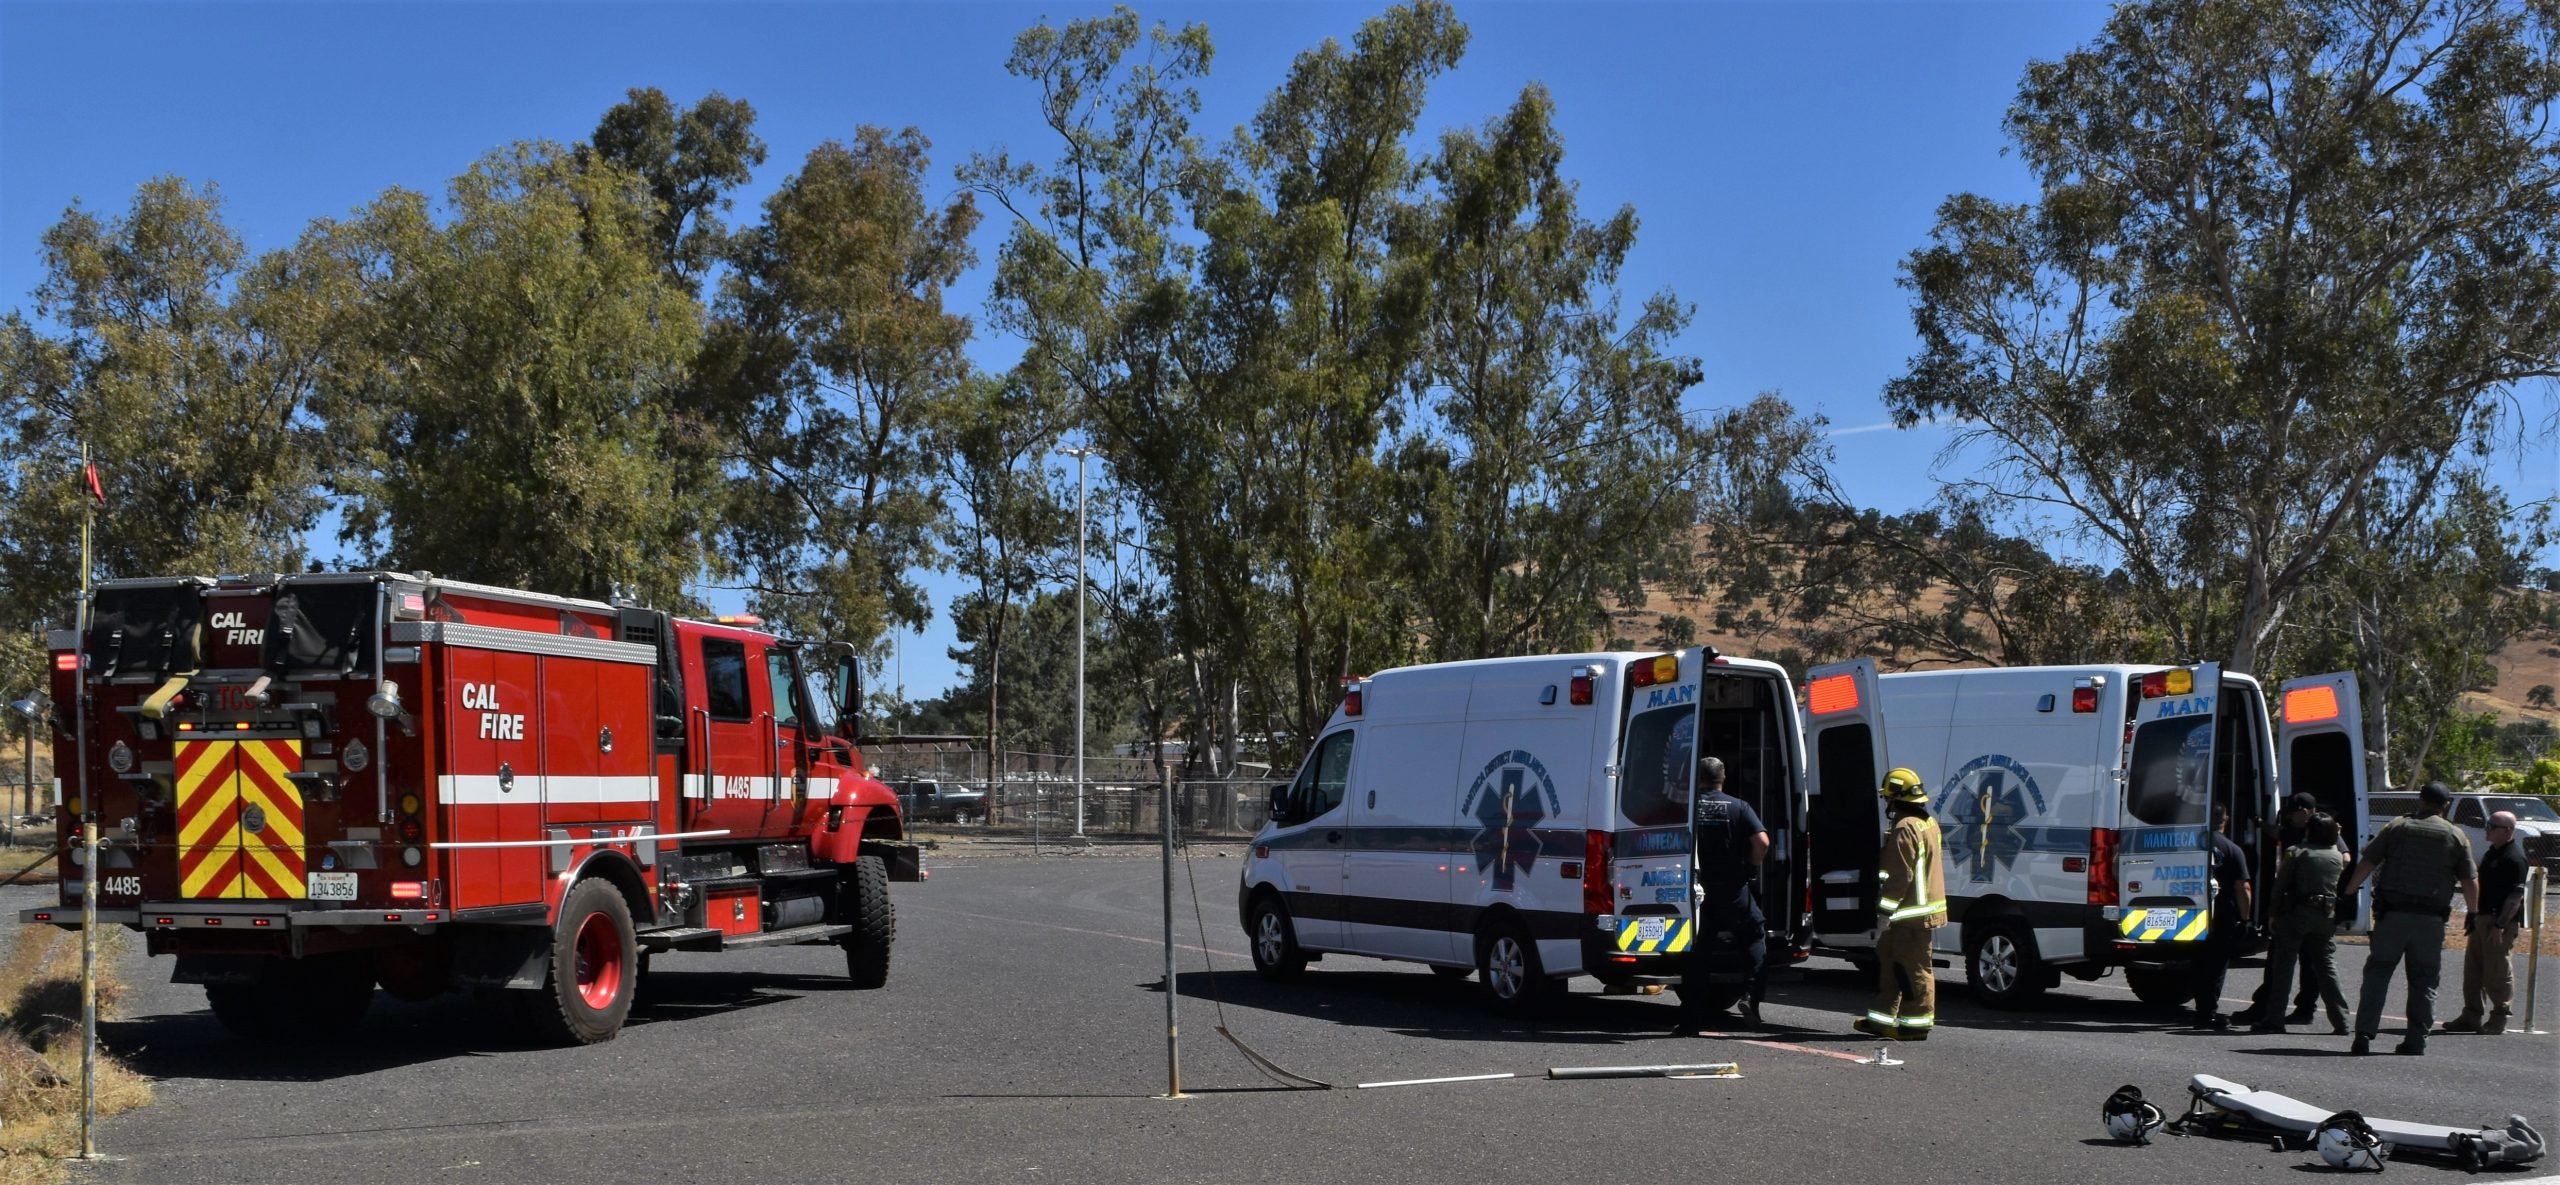 Ambulances and fire truck at a staging area for a disaster training drill.